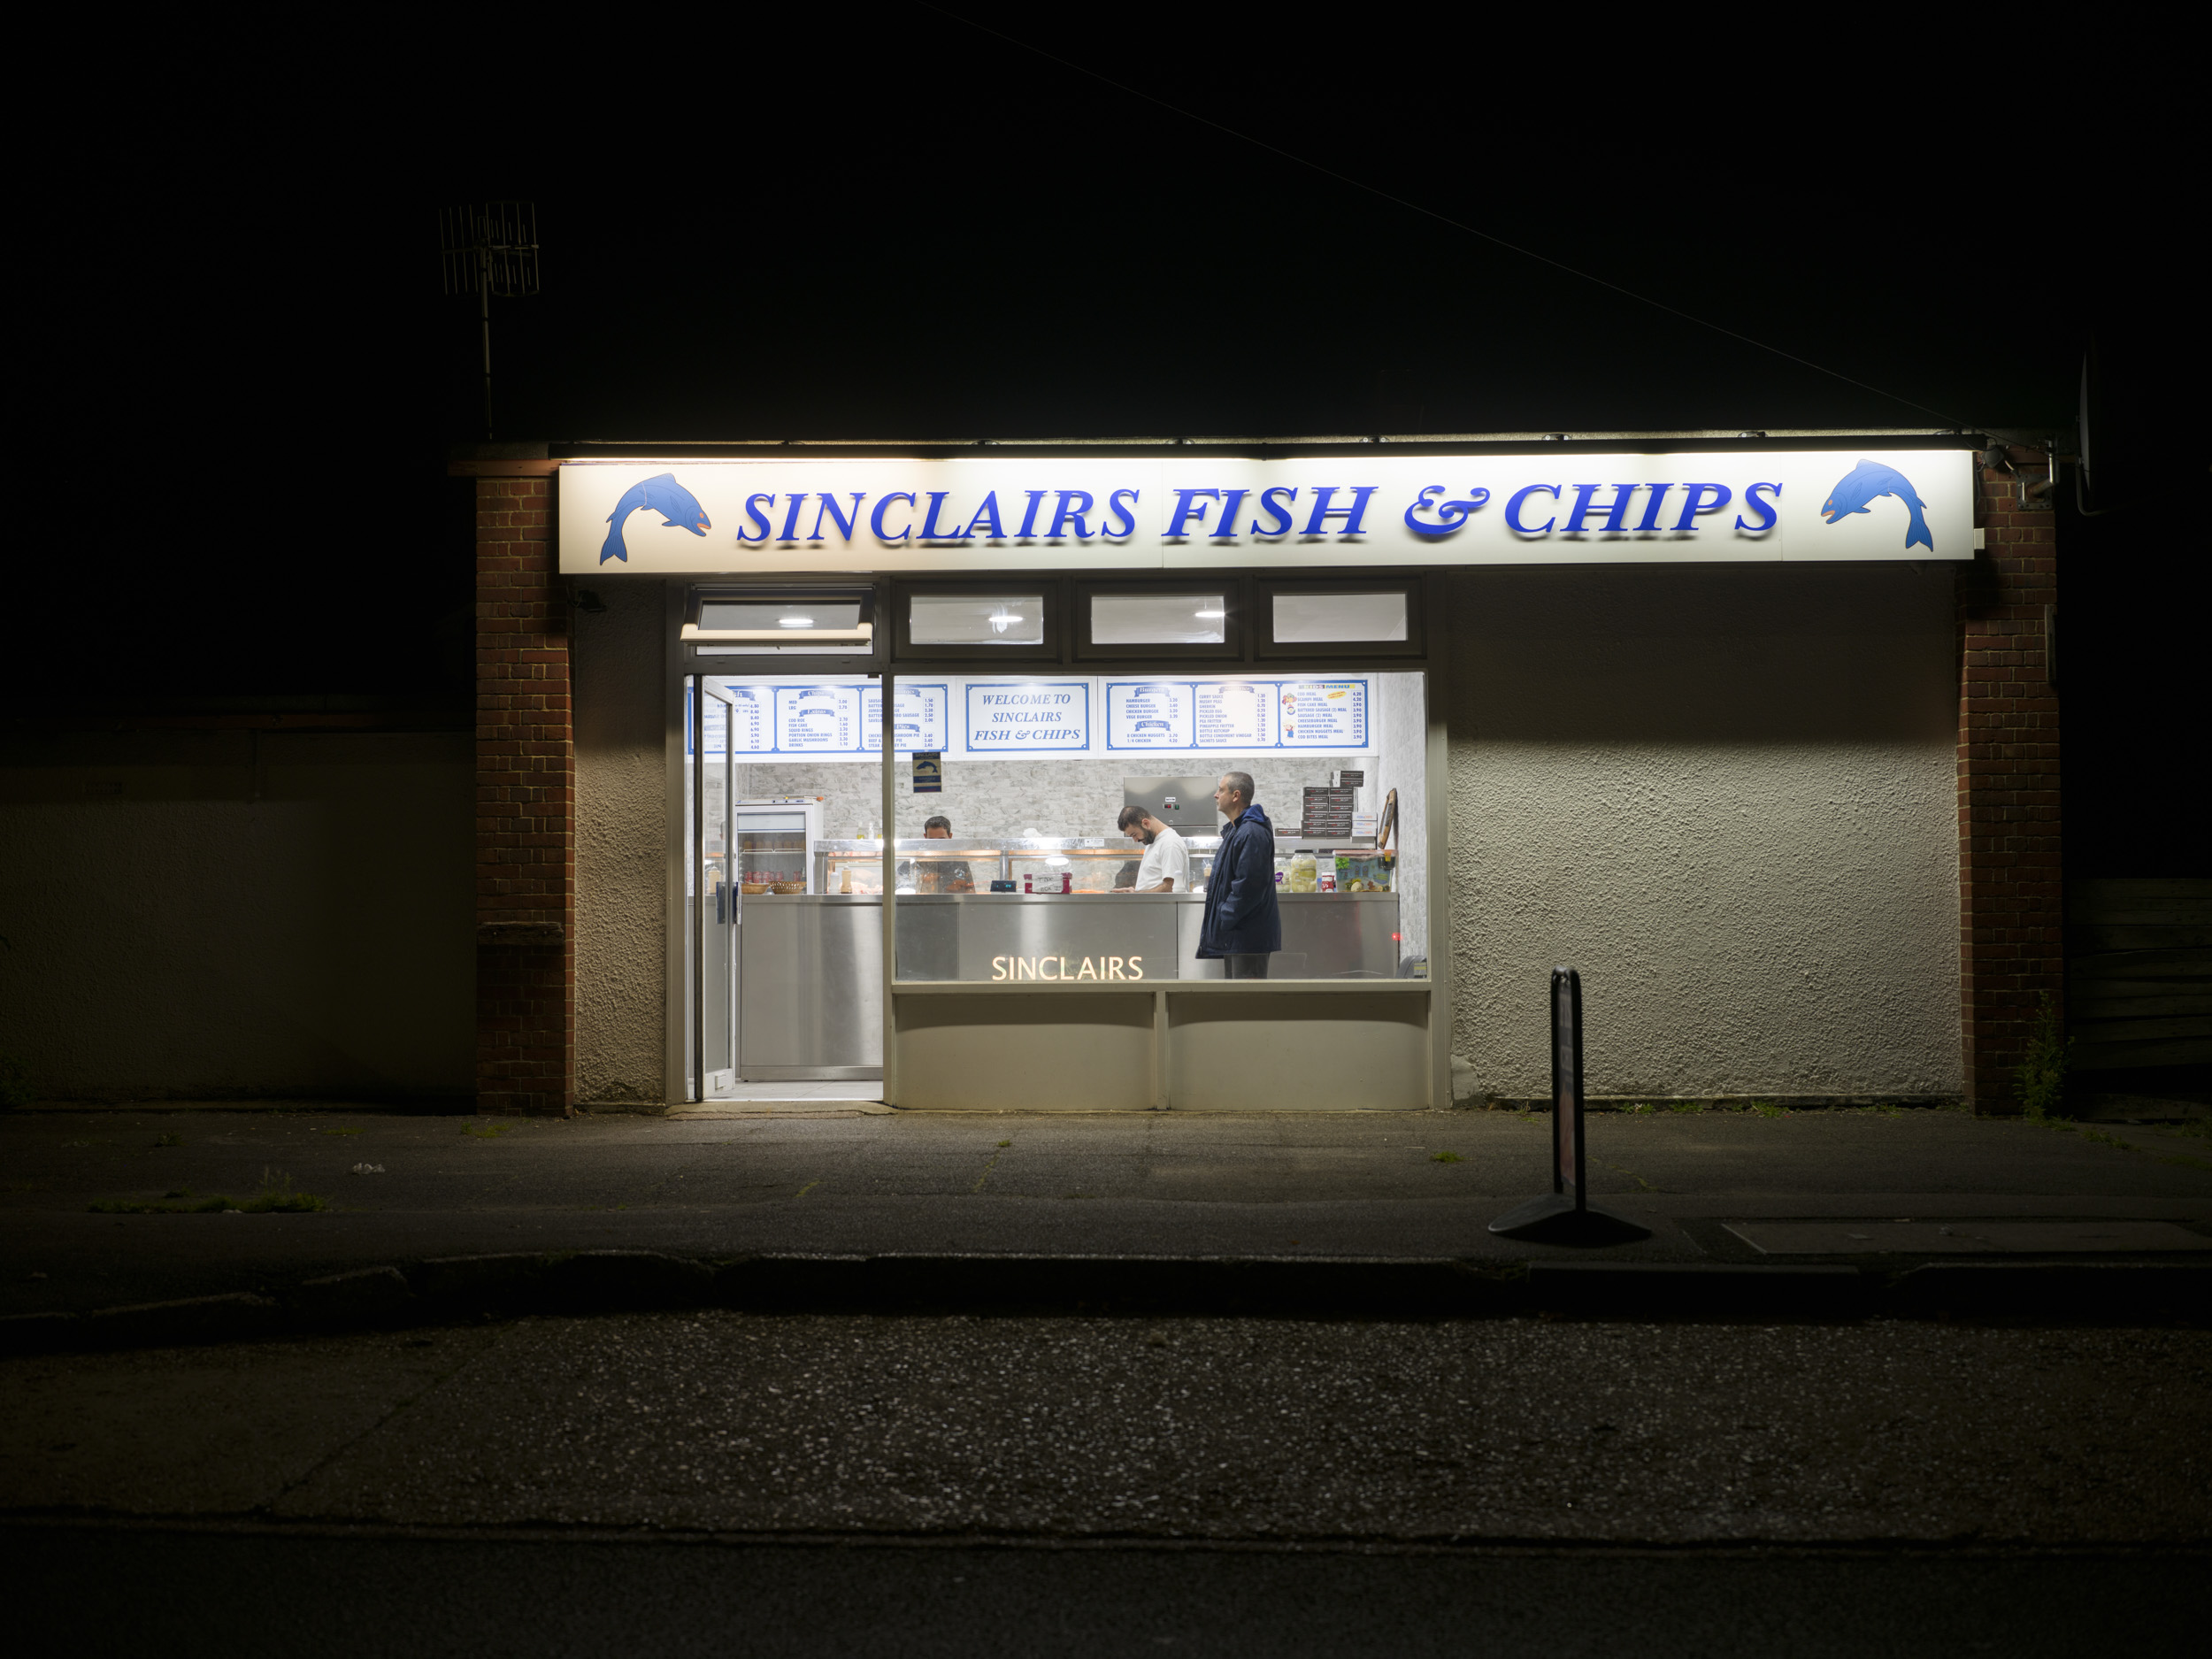 Sample image taken with the Hasselblad X2D 100C of a fish and chip shop at night and brightened +3EV